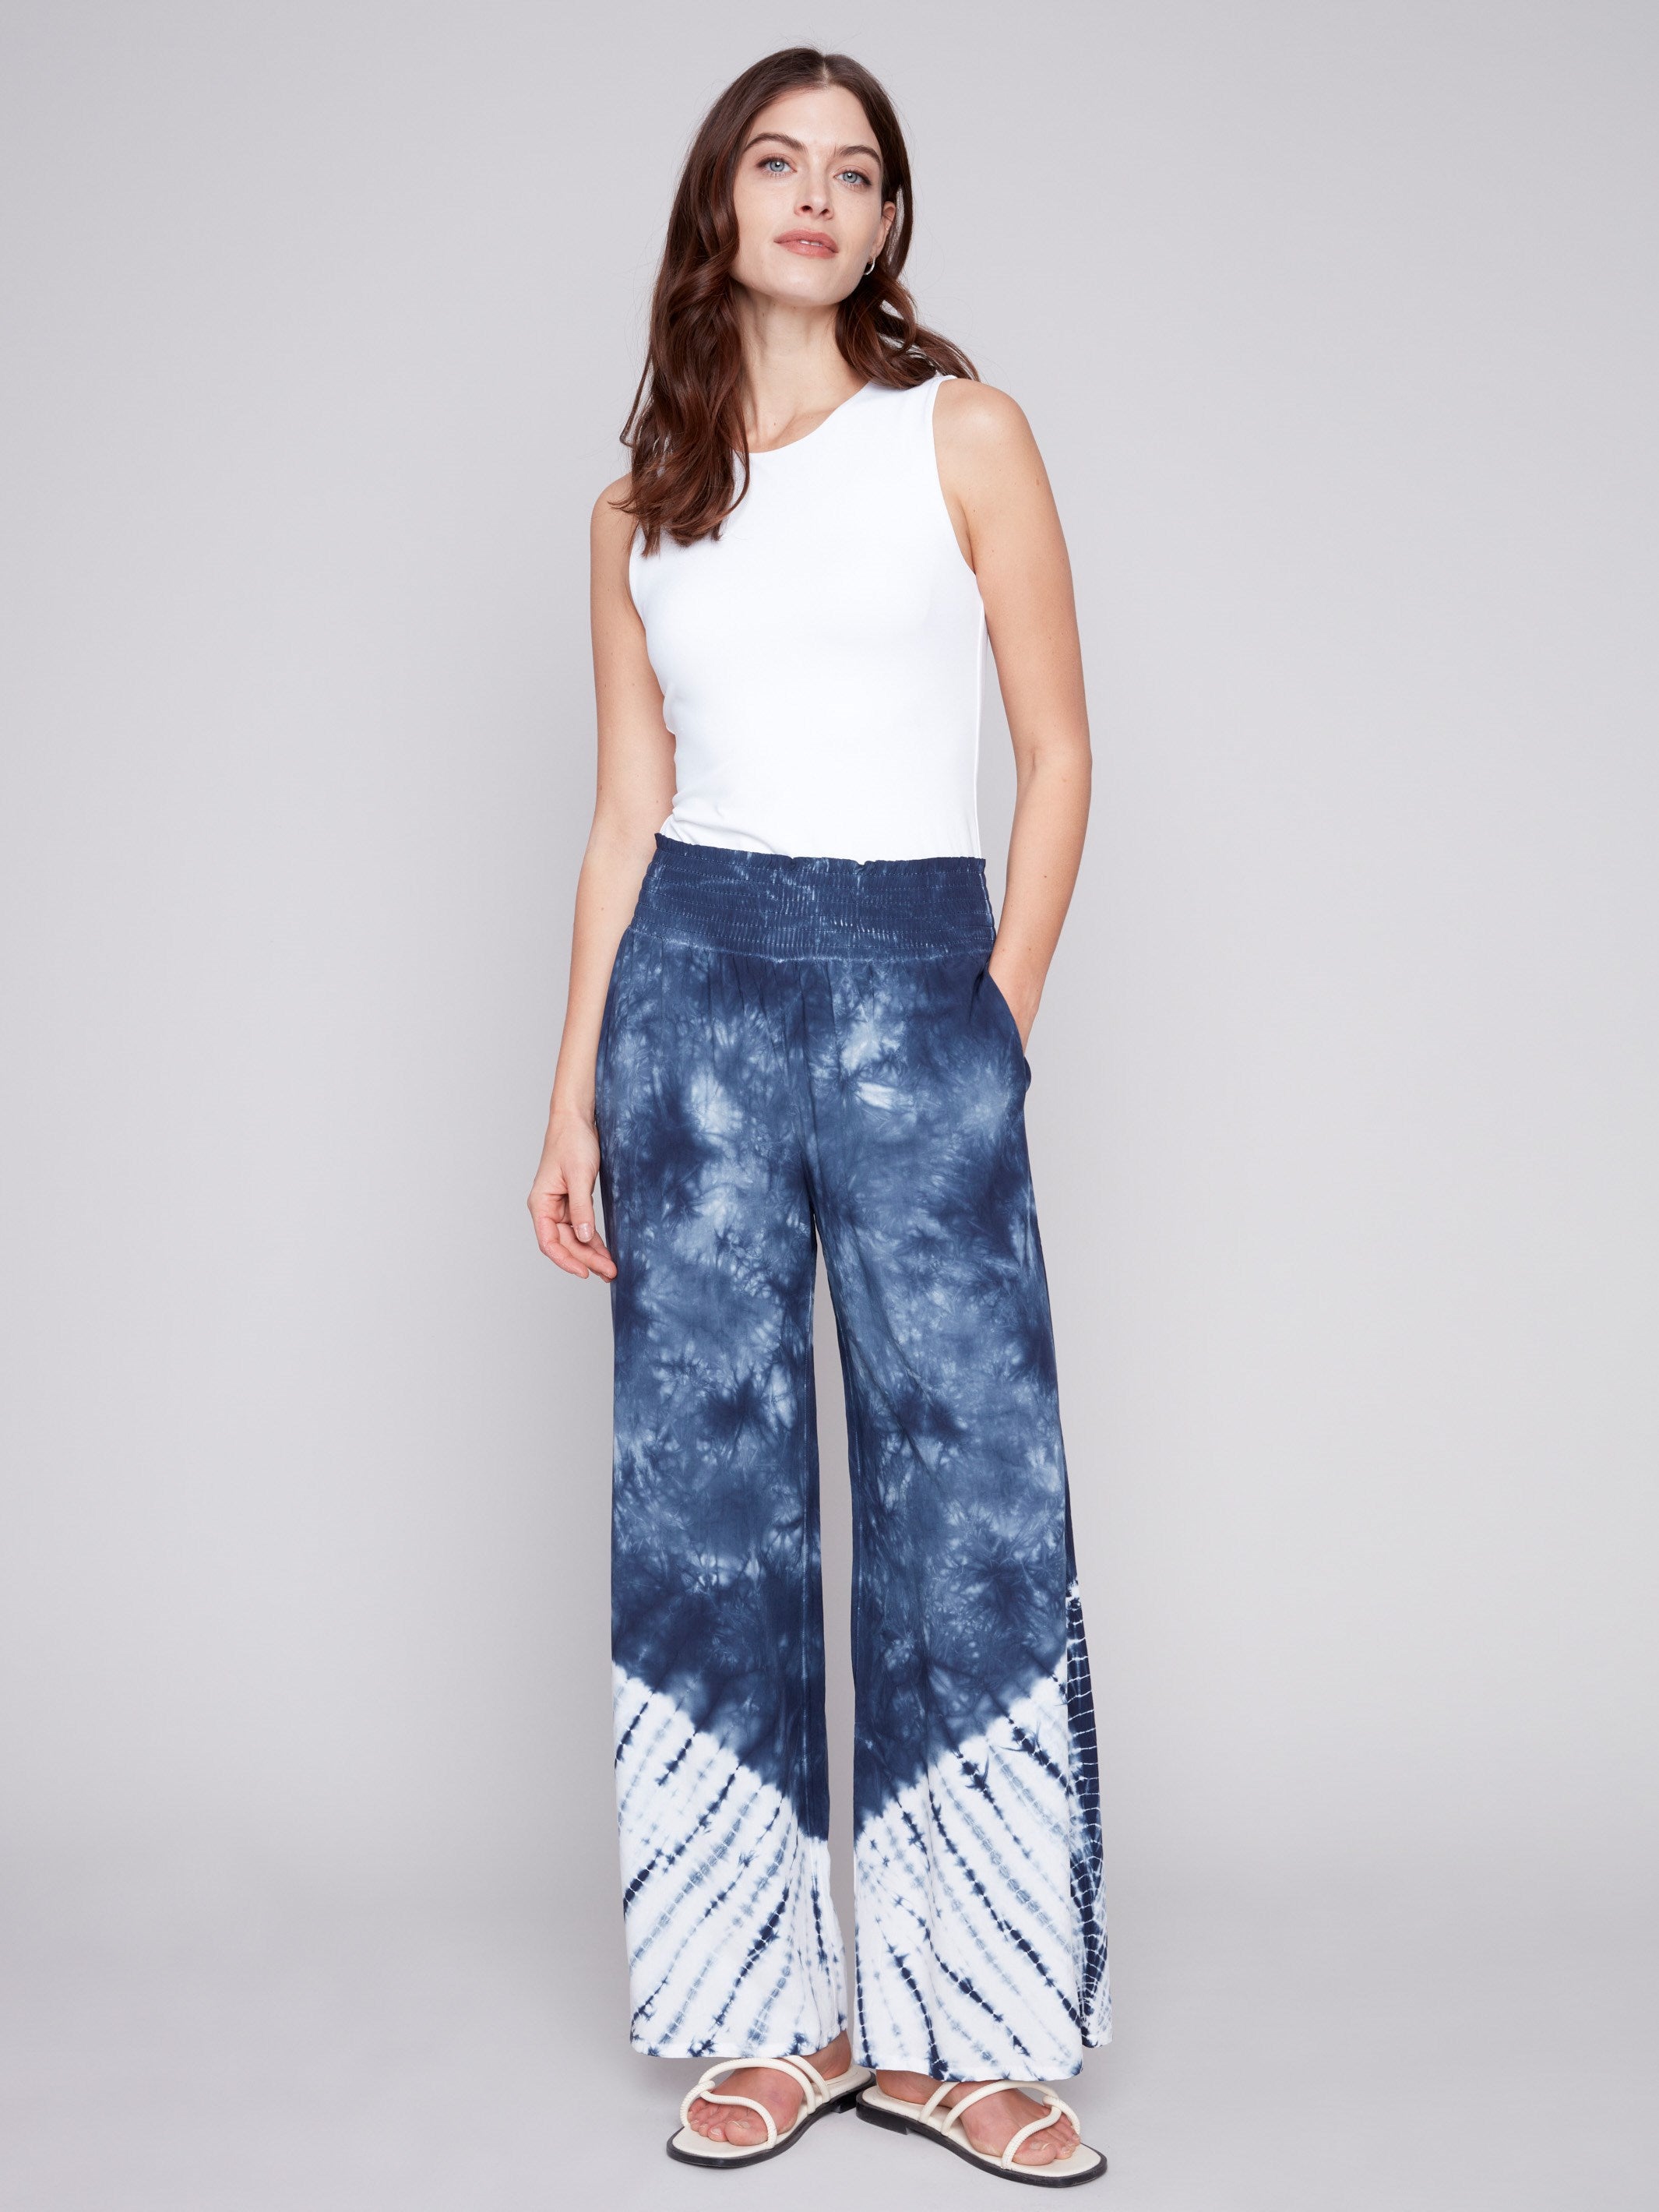 Printed Flowy Palazzo Pants - Navy - Charlie B Collection Canada - Image 1